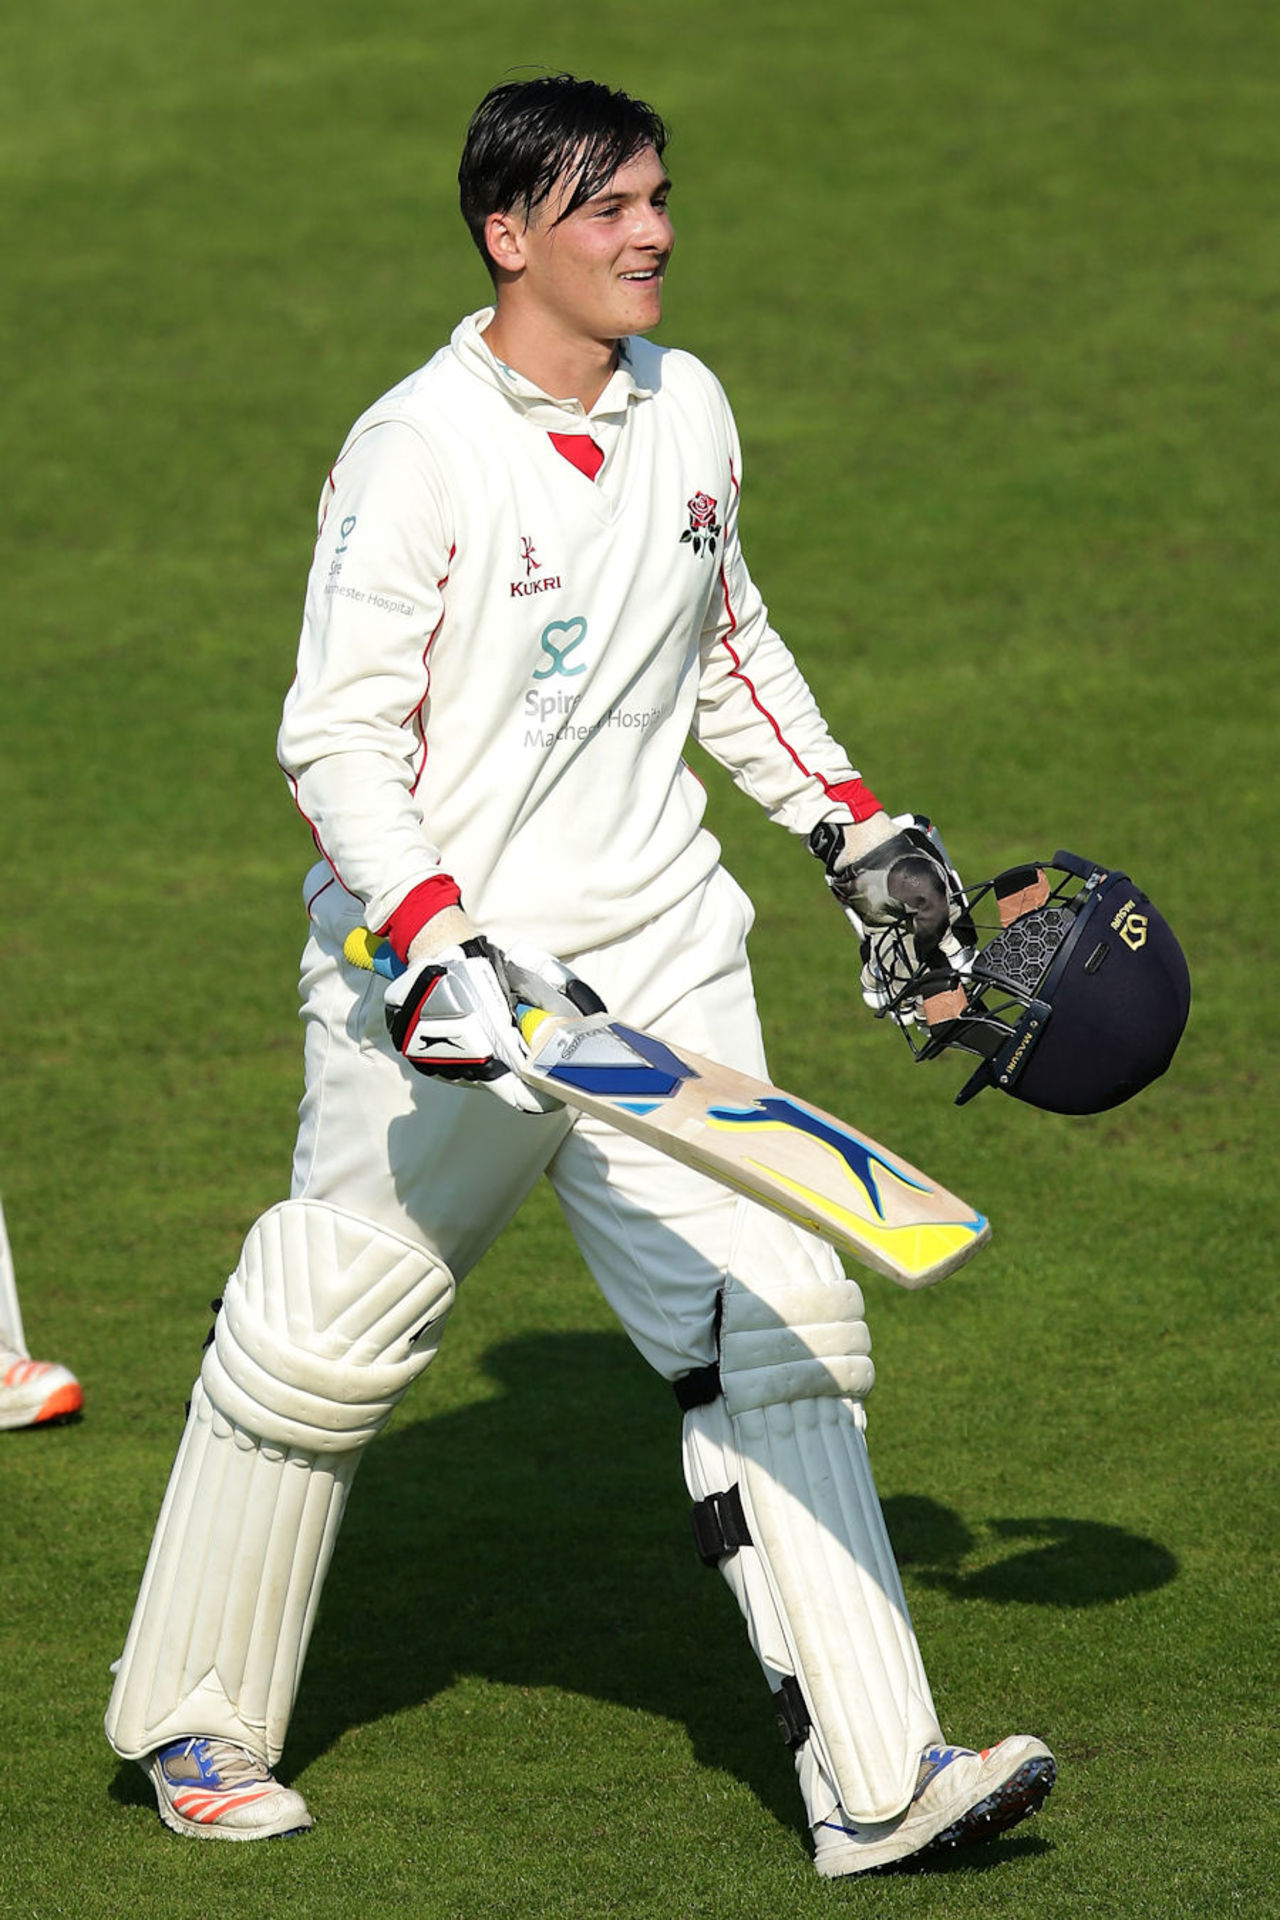 Rob Jones celebrates his maiden Championship hundred for Lancashire, Lancashire v Middlesex, Specsavers Championship Division One, Old Trafford, September 14, 2016